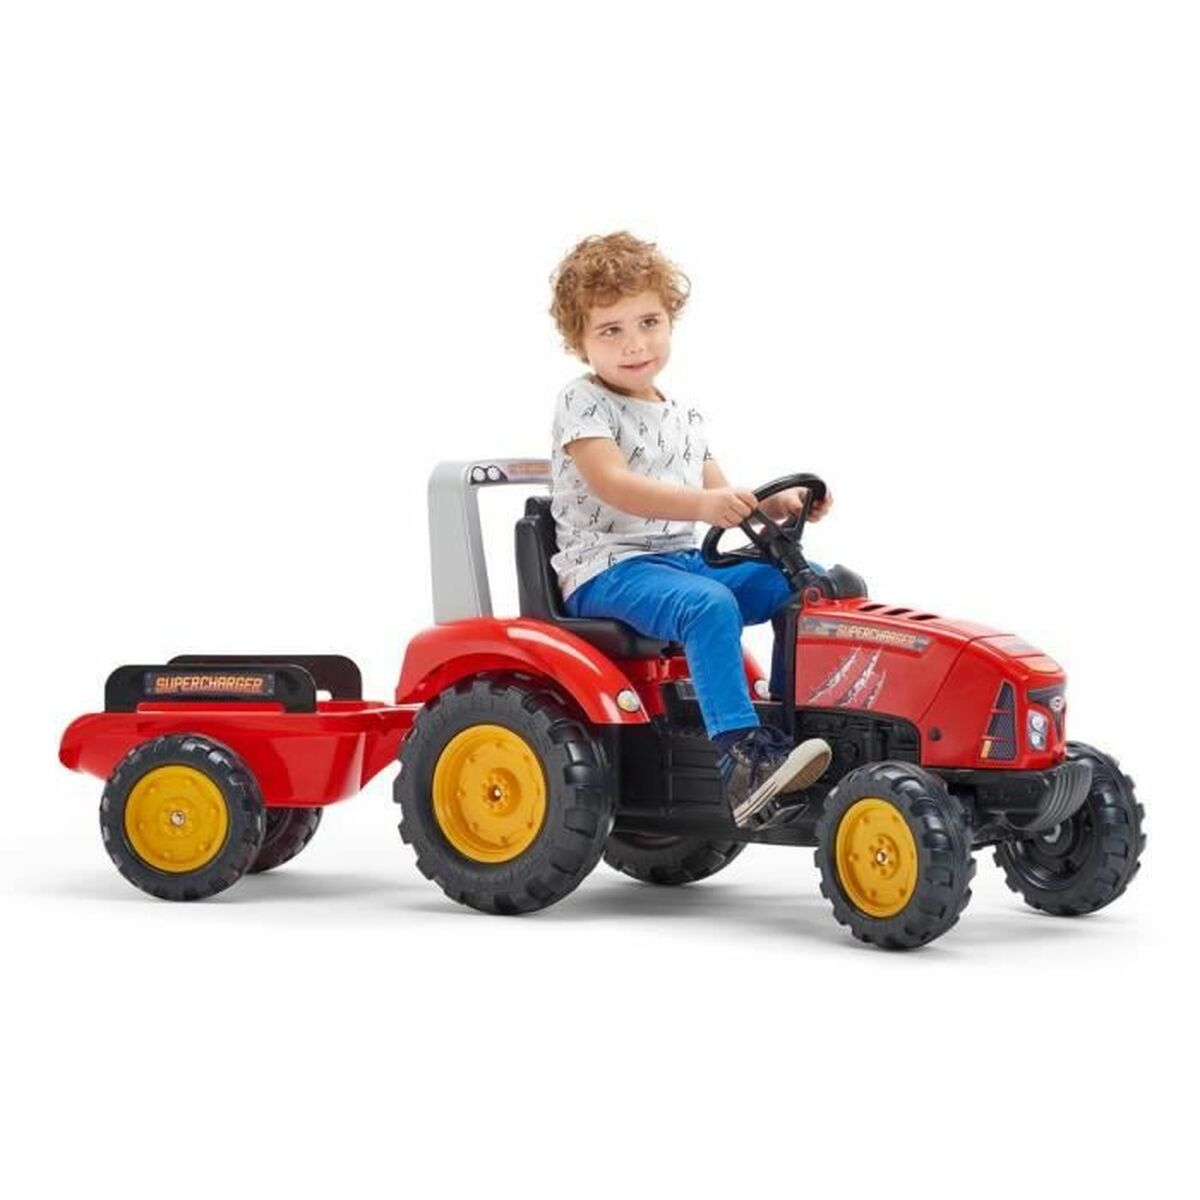 Pedal Tractor Falk Supercharger 2020AB Red